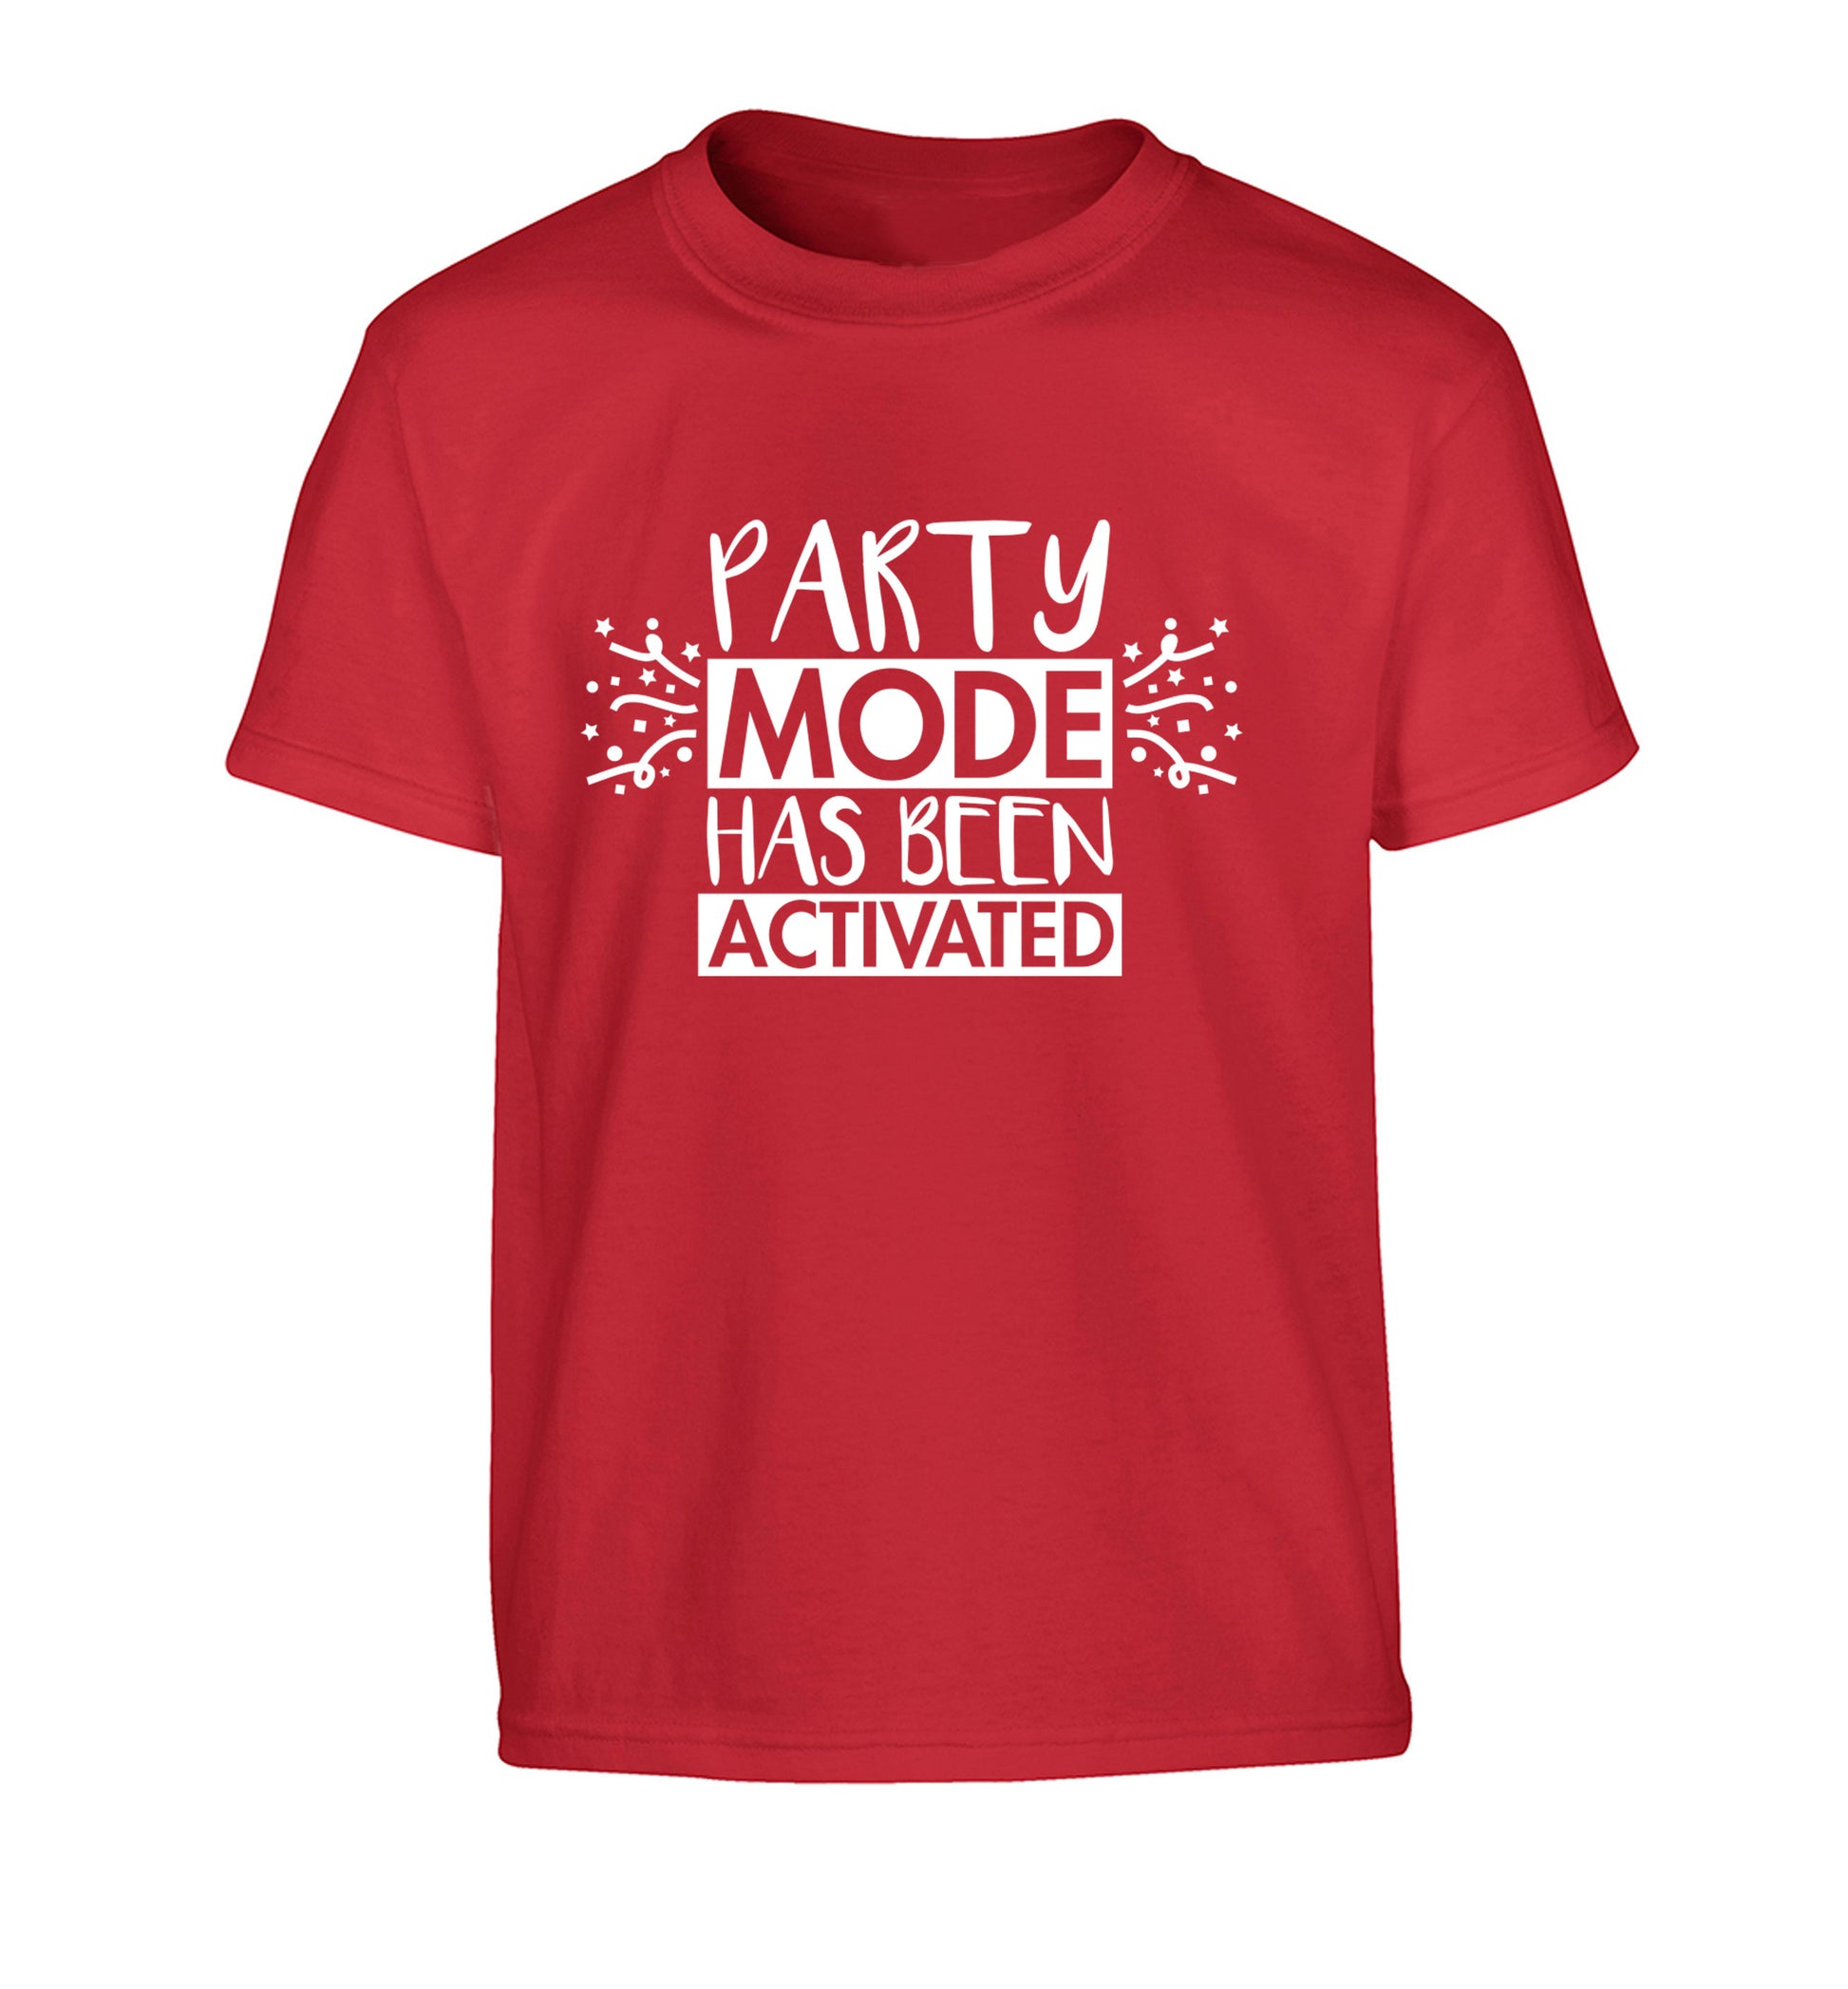 Please do not disturb party mode has been activated Children's red Tshirt 12-14 Years